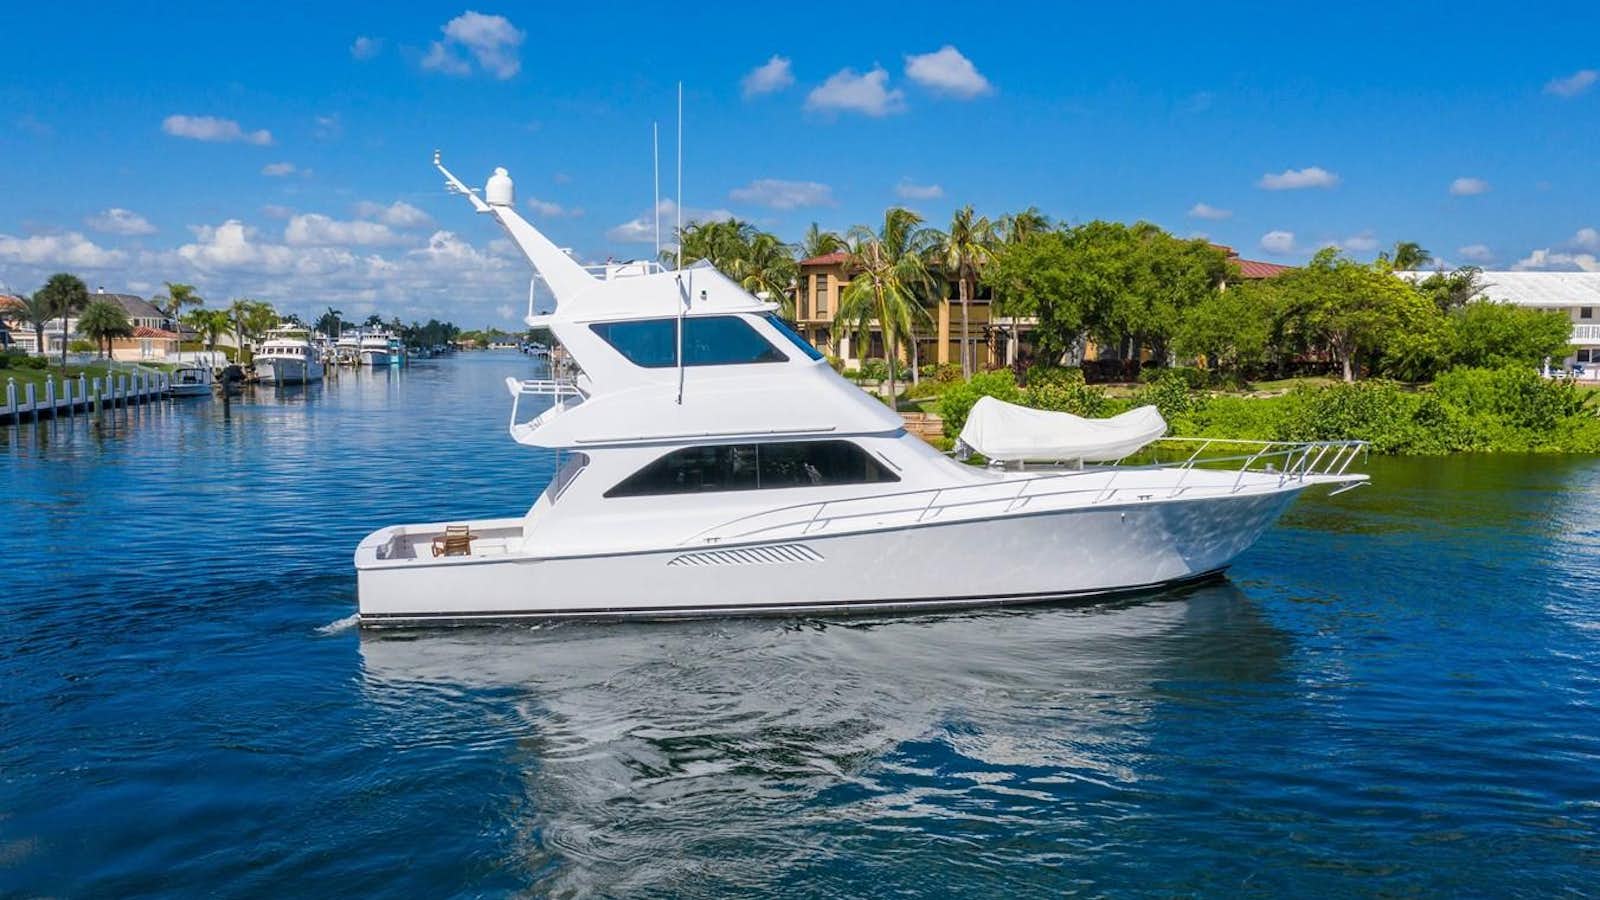 GOOD TO GO Yacht for Sale in united states, 61' (18.59m) 2002 VIKING